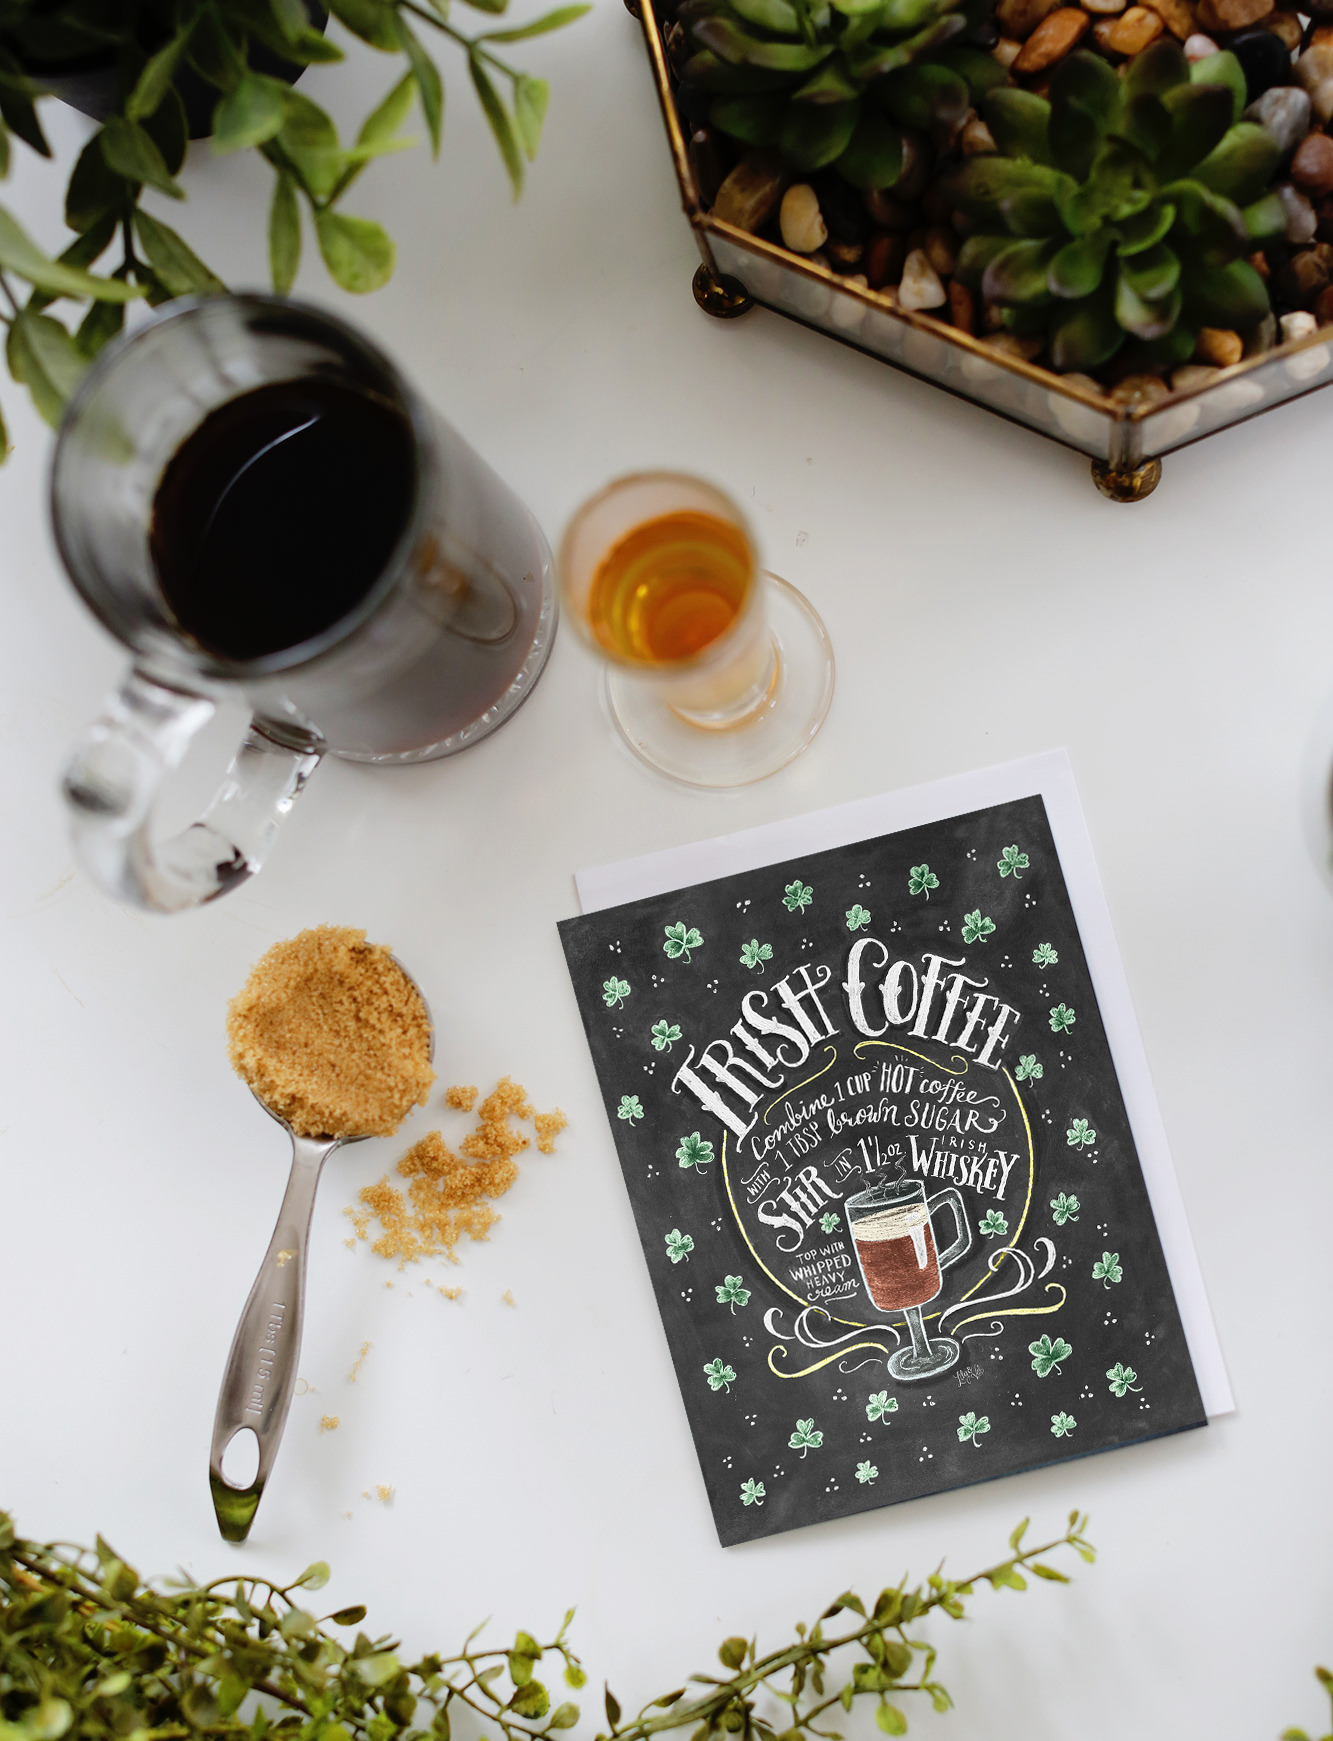 Our Irish Coffee Recipe card is great to send, and also to use! Mix up a glass of Irish Coffee this St. Patrick's Day!